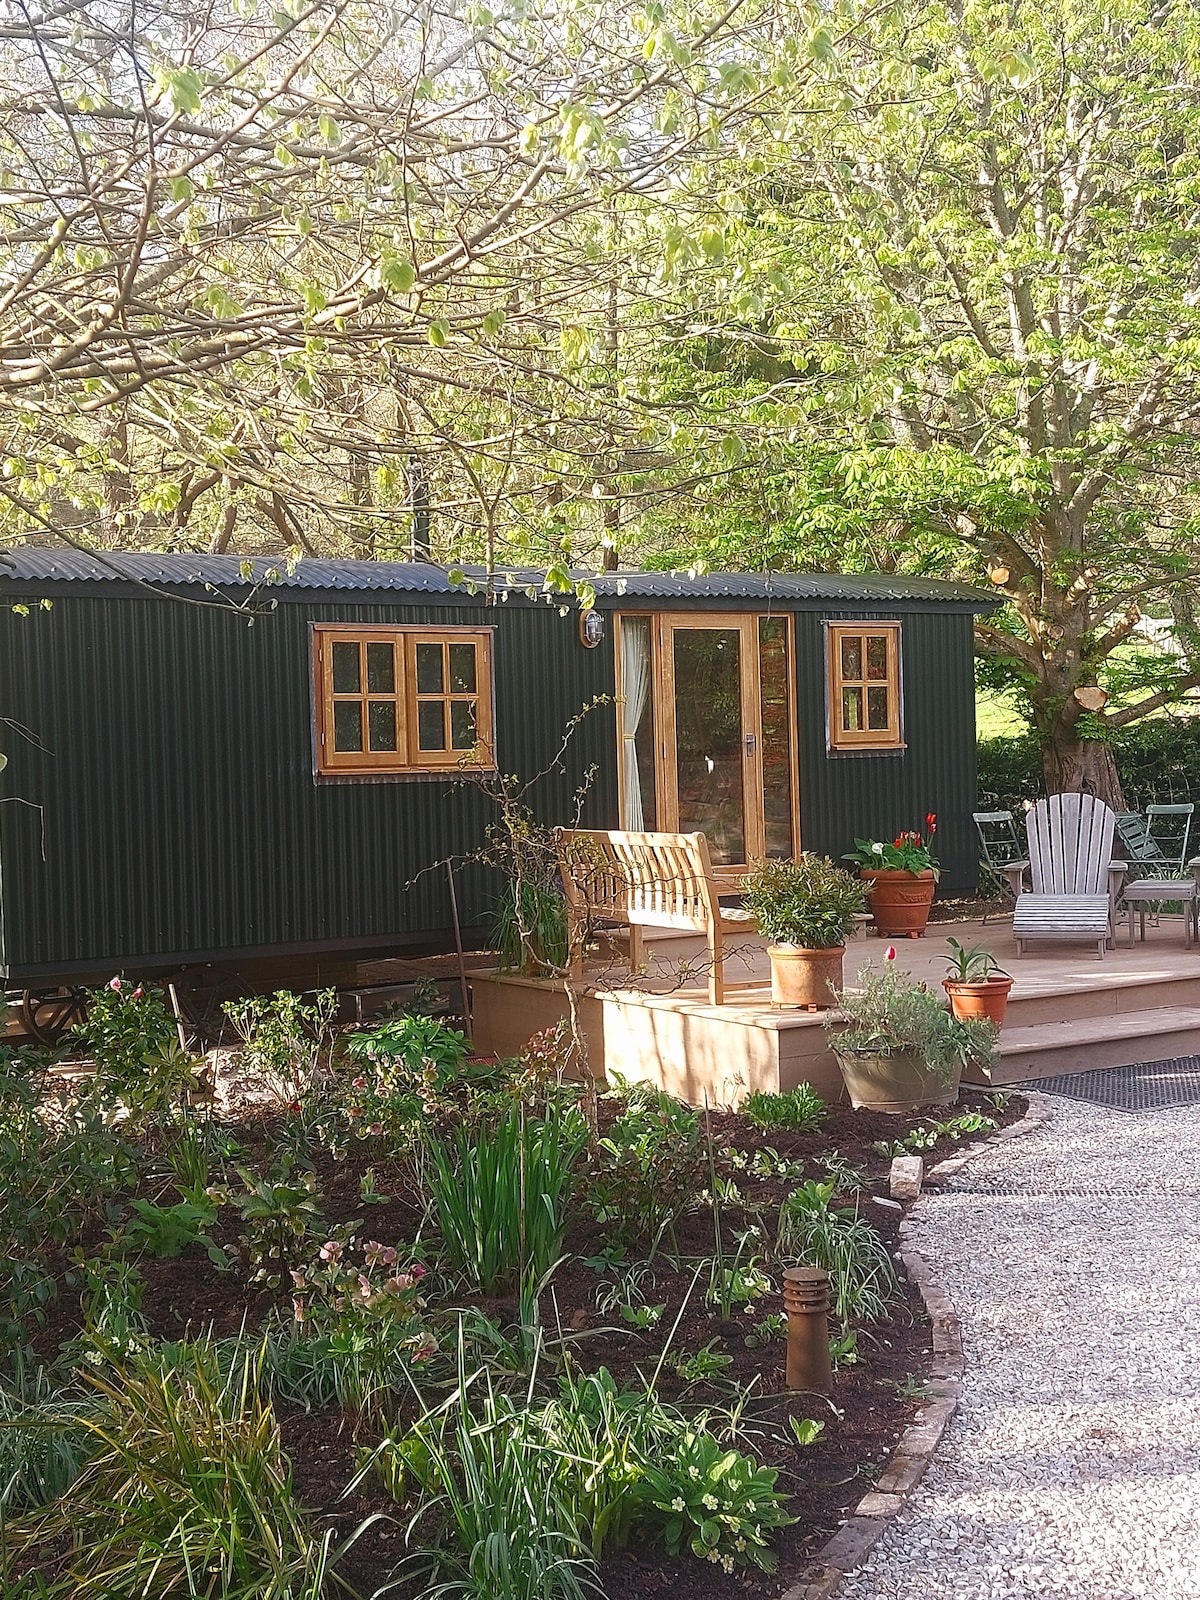 The New Eco Gardener's Cabin at Challow Farm